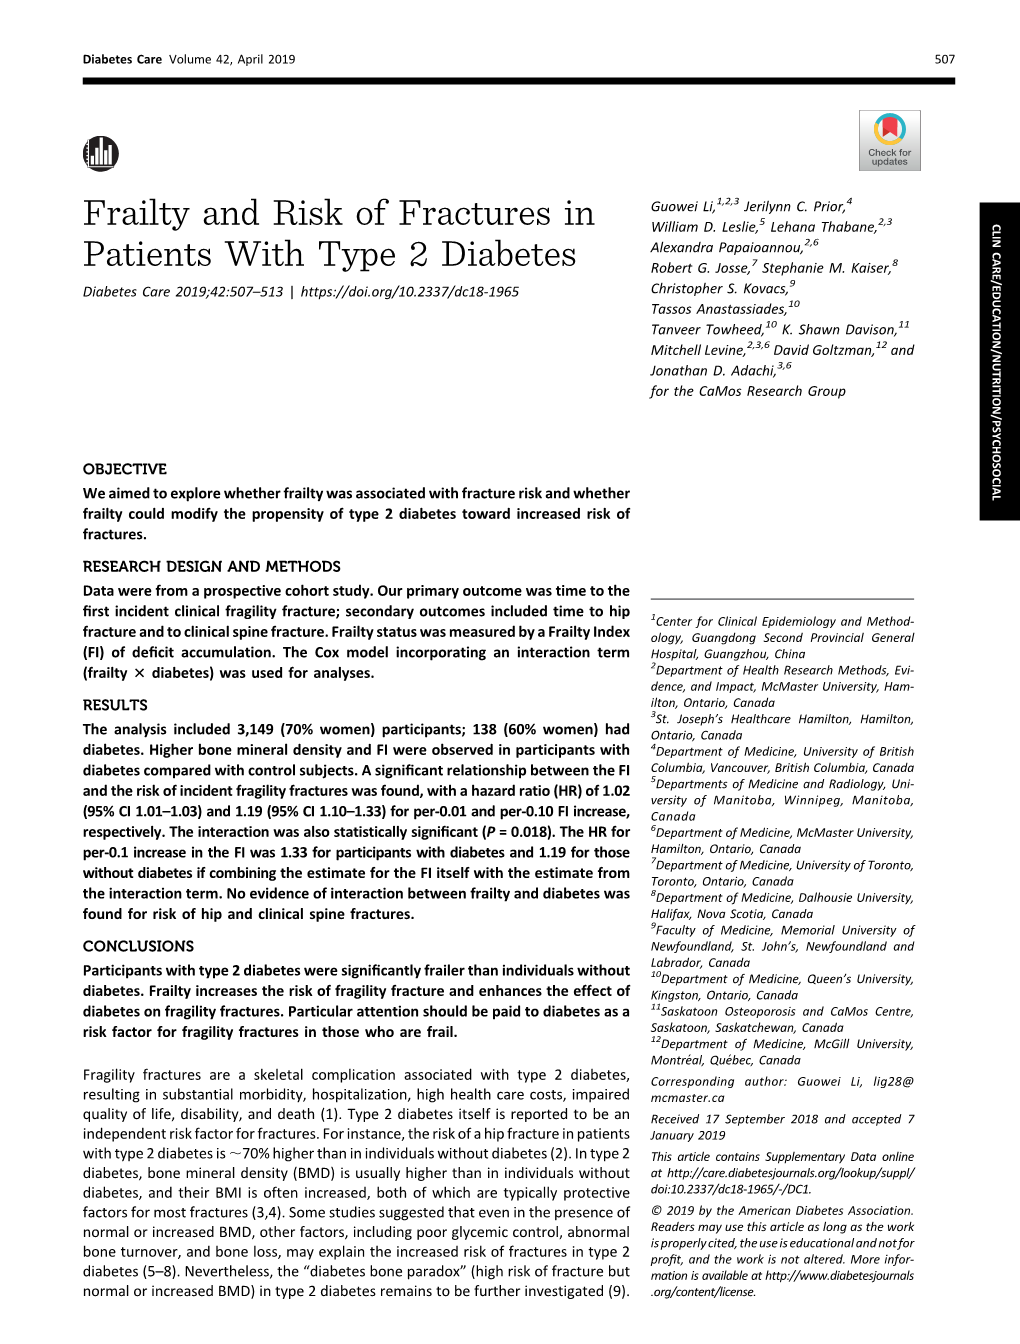 Frailty and Risk of Fractures in Patients with Type 2 Diabetes